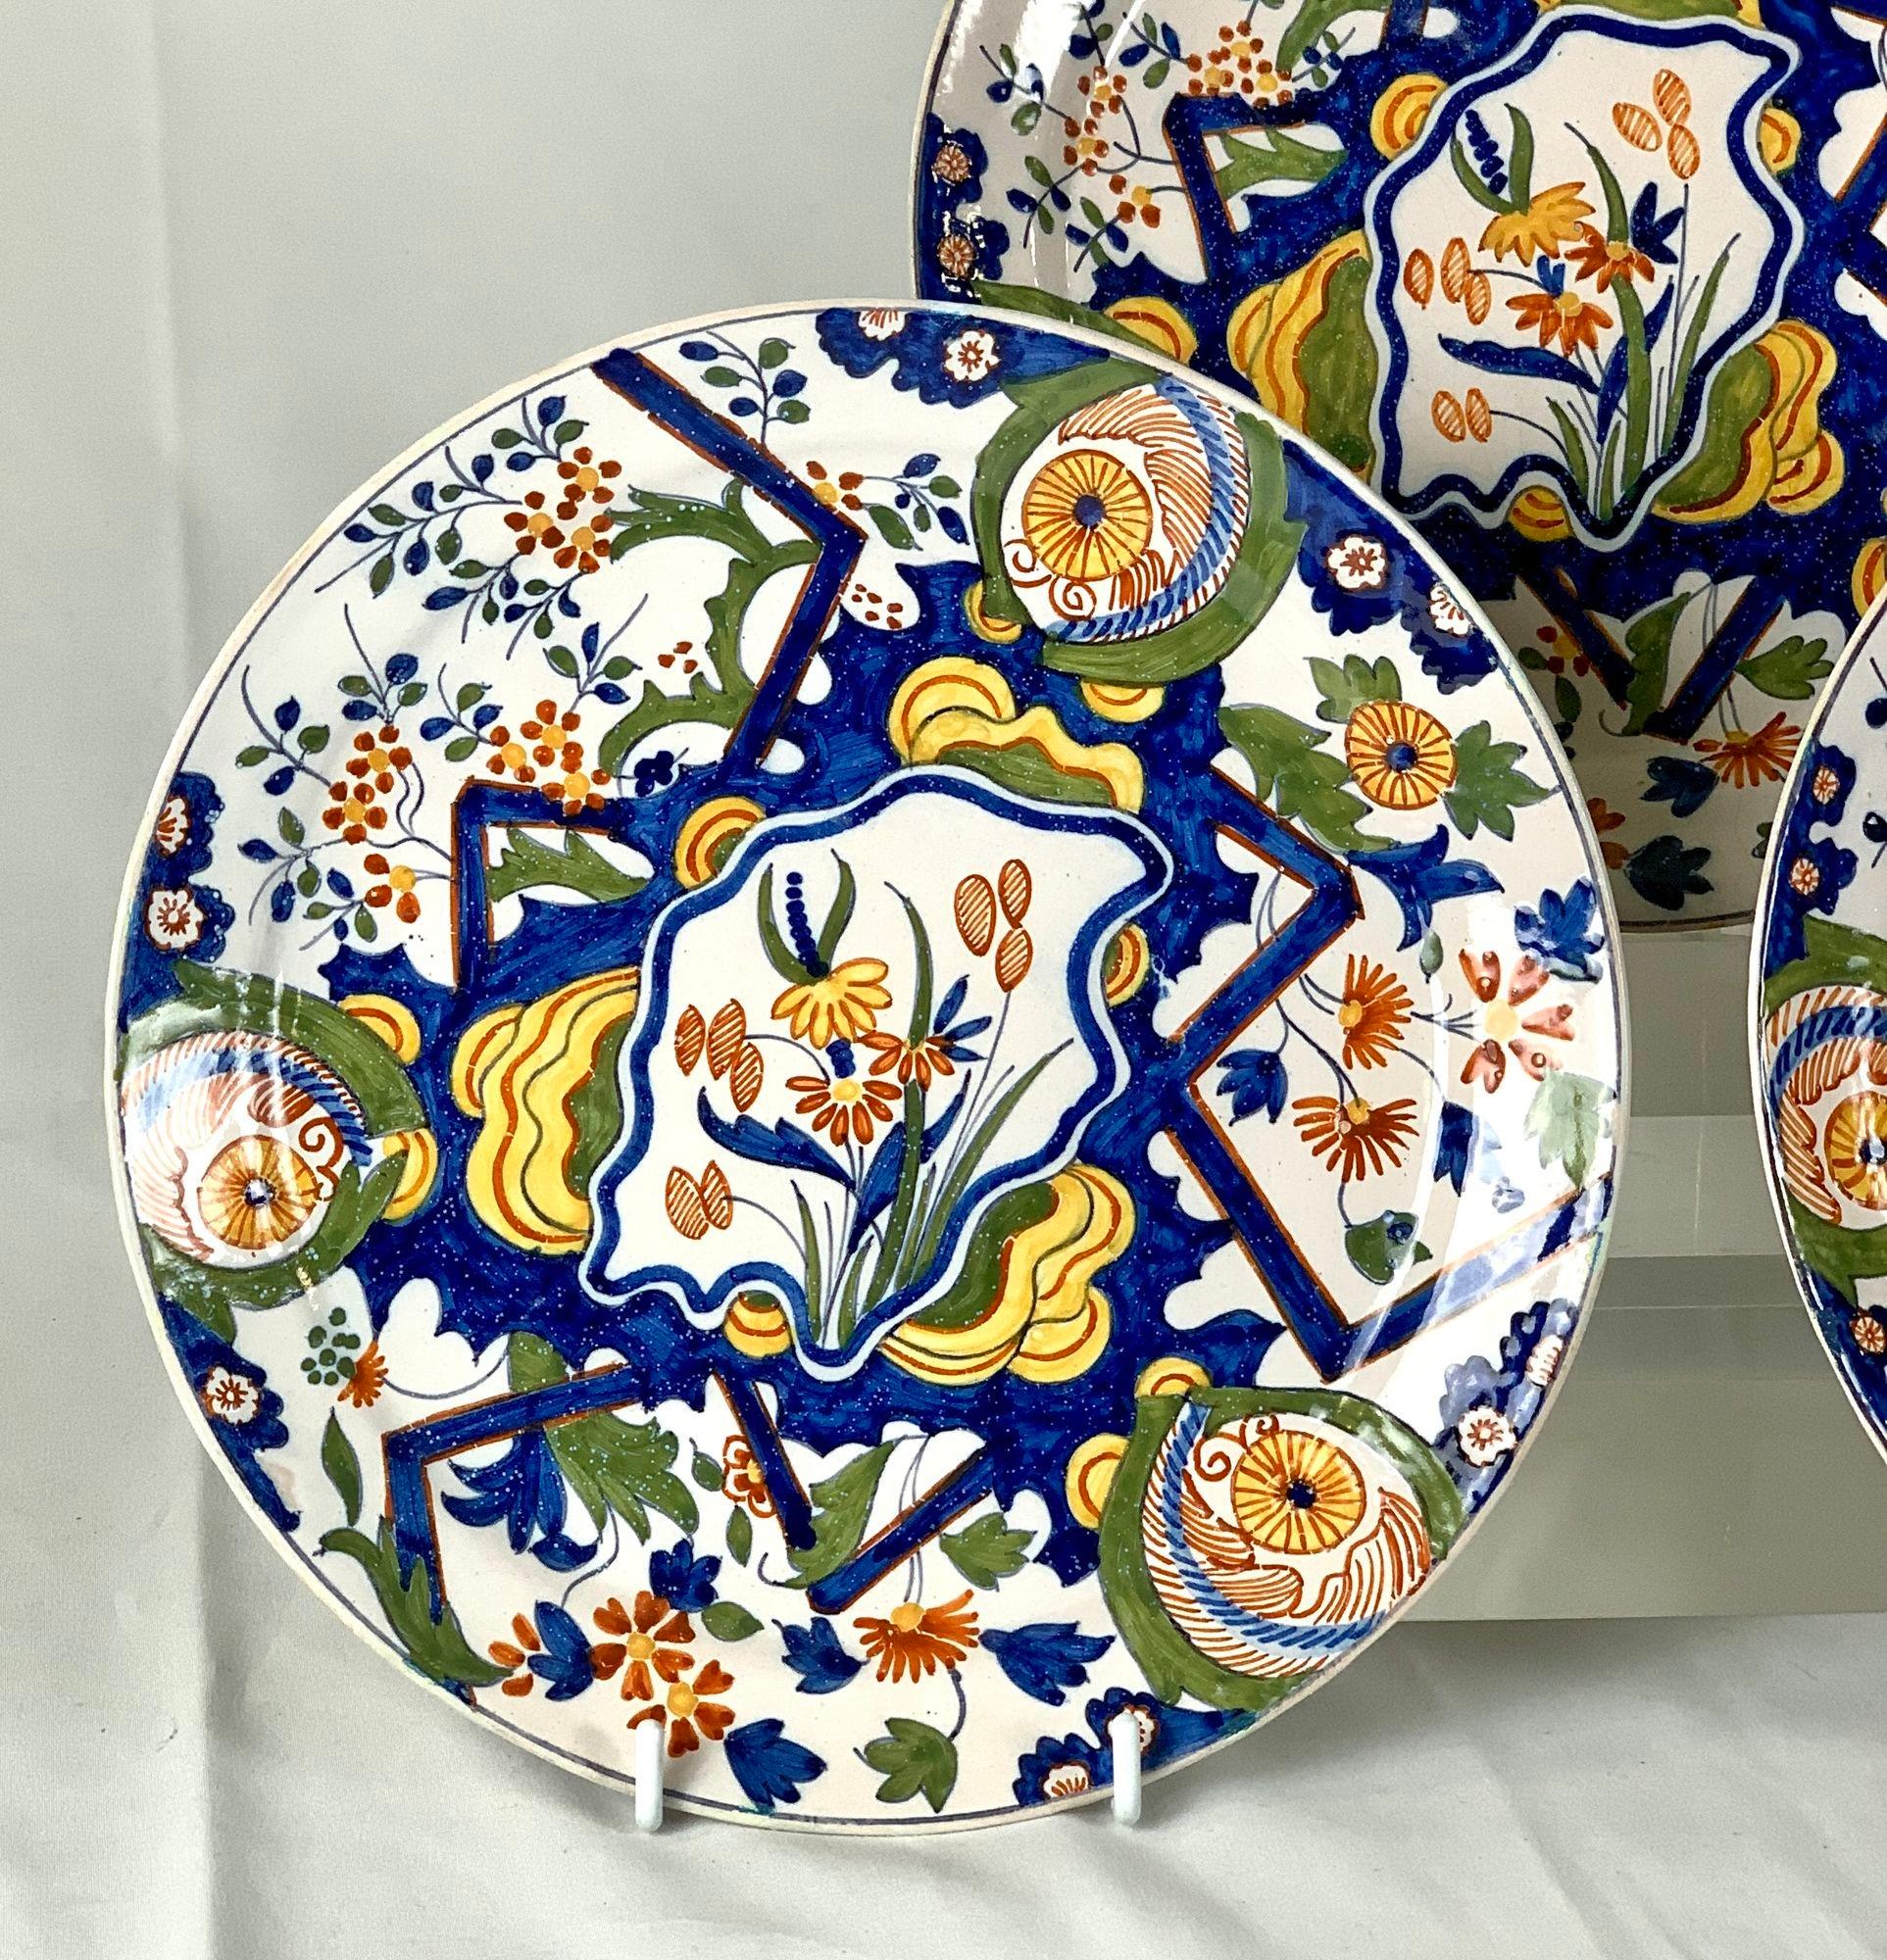 Hand-Painted Five Delft Dishes in the 